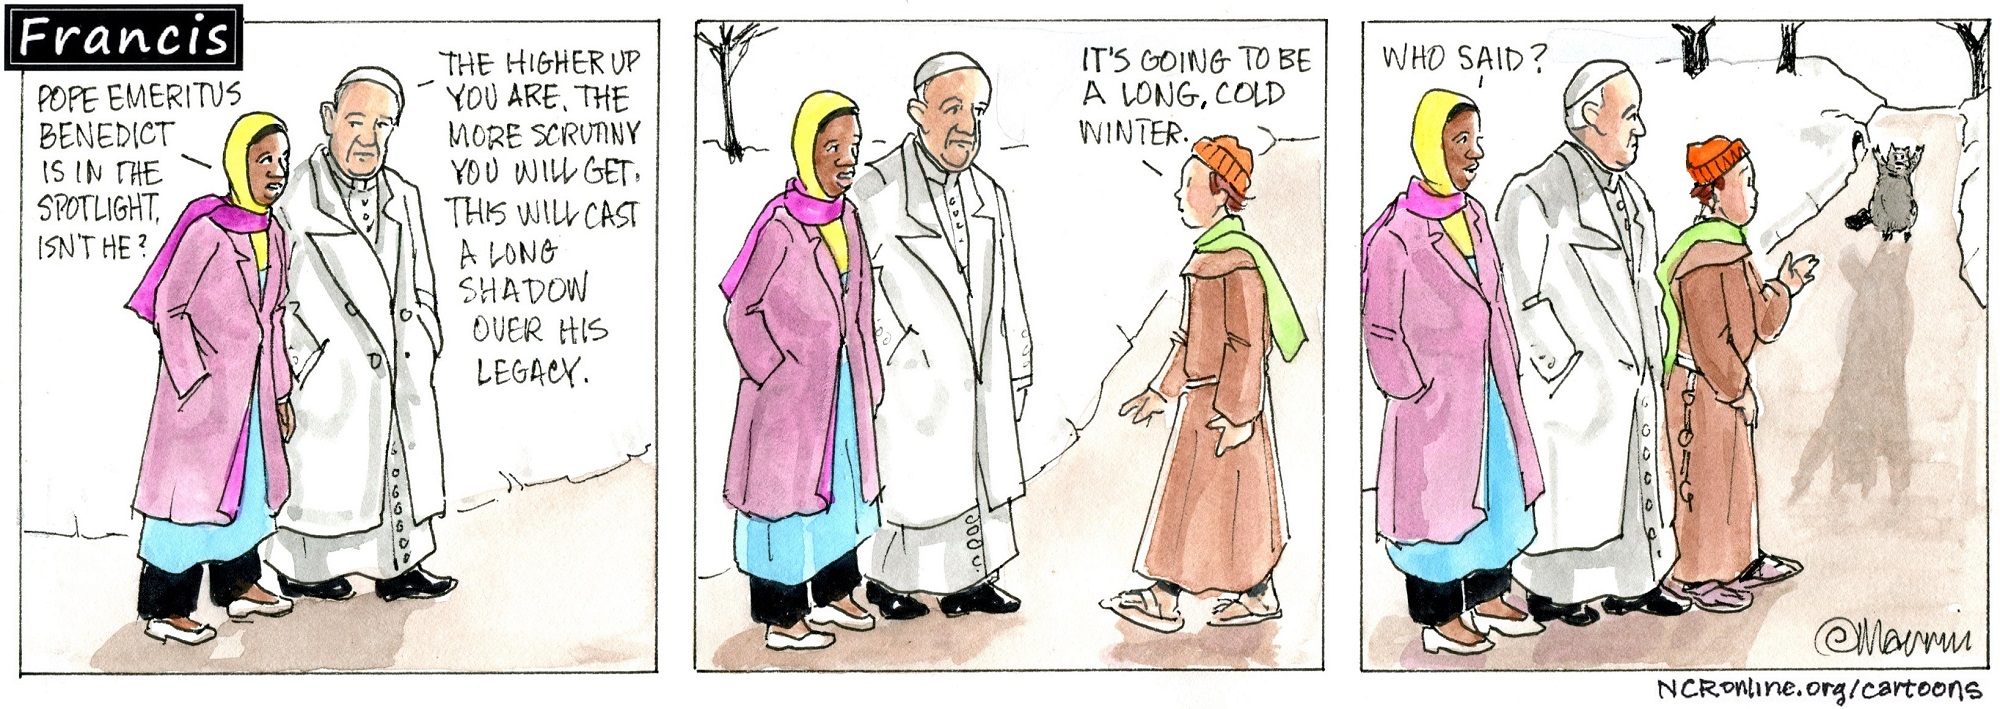 Francis, the comic strip: Pope Emeritus Benedict is in the spotlight, with a long shadow cast over his legacy.